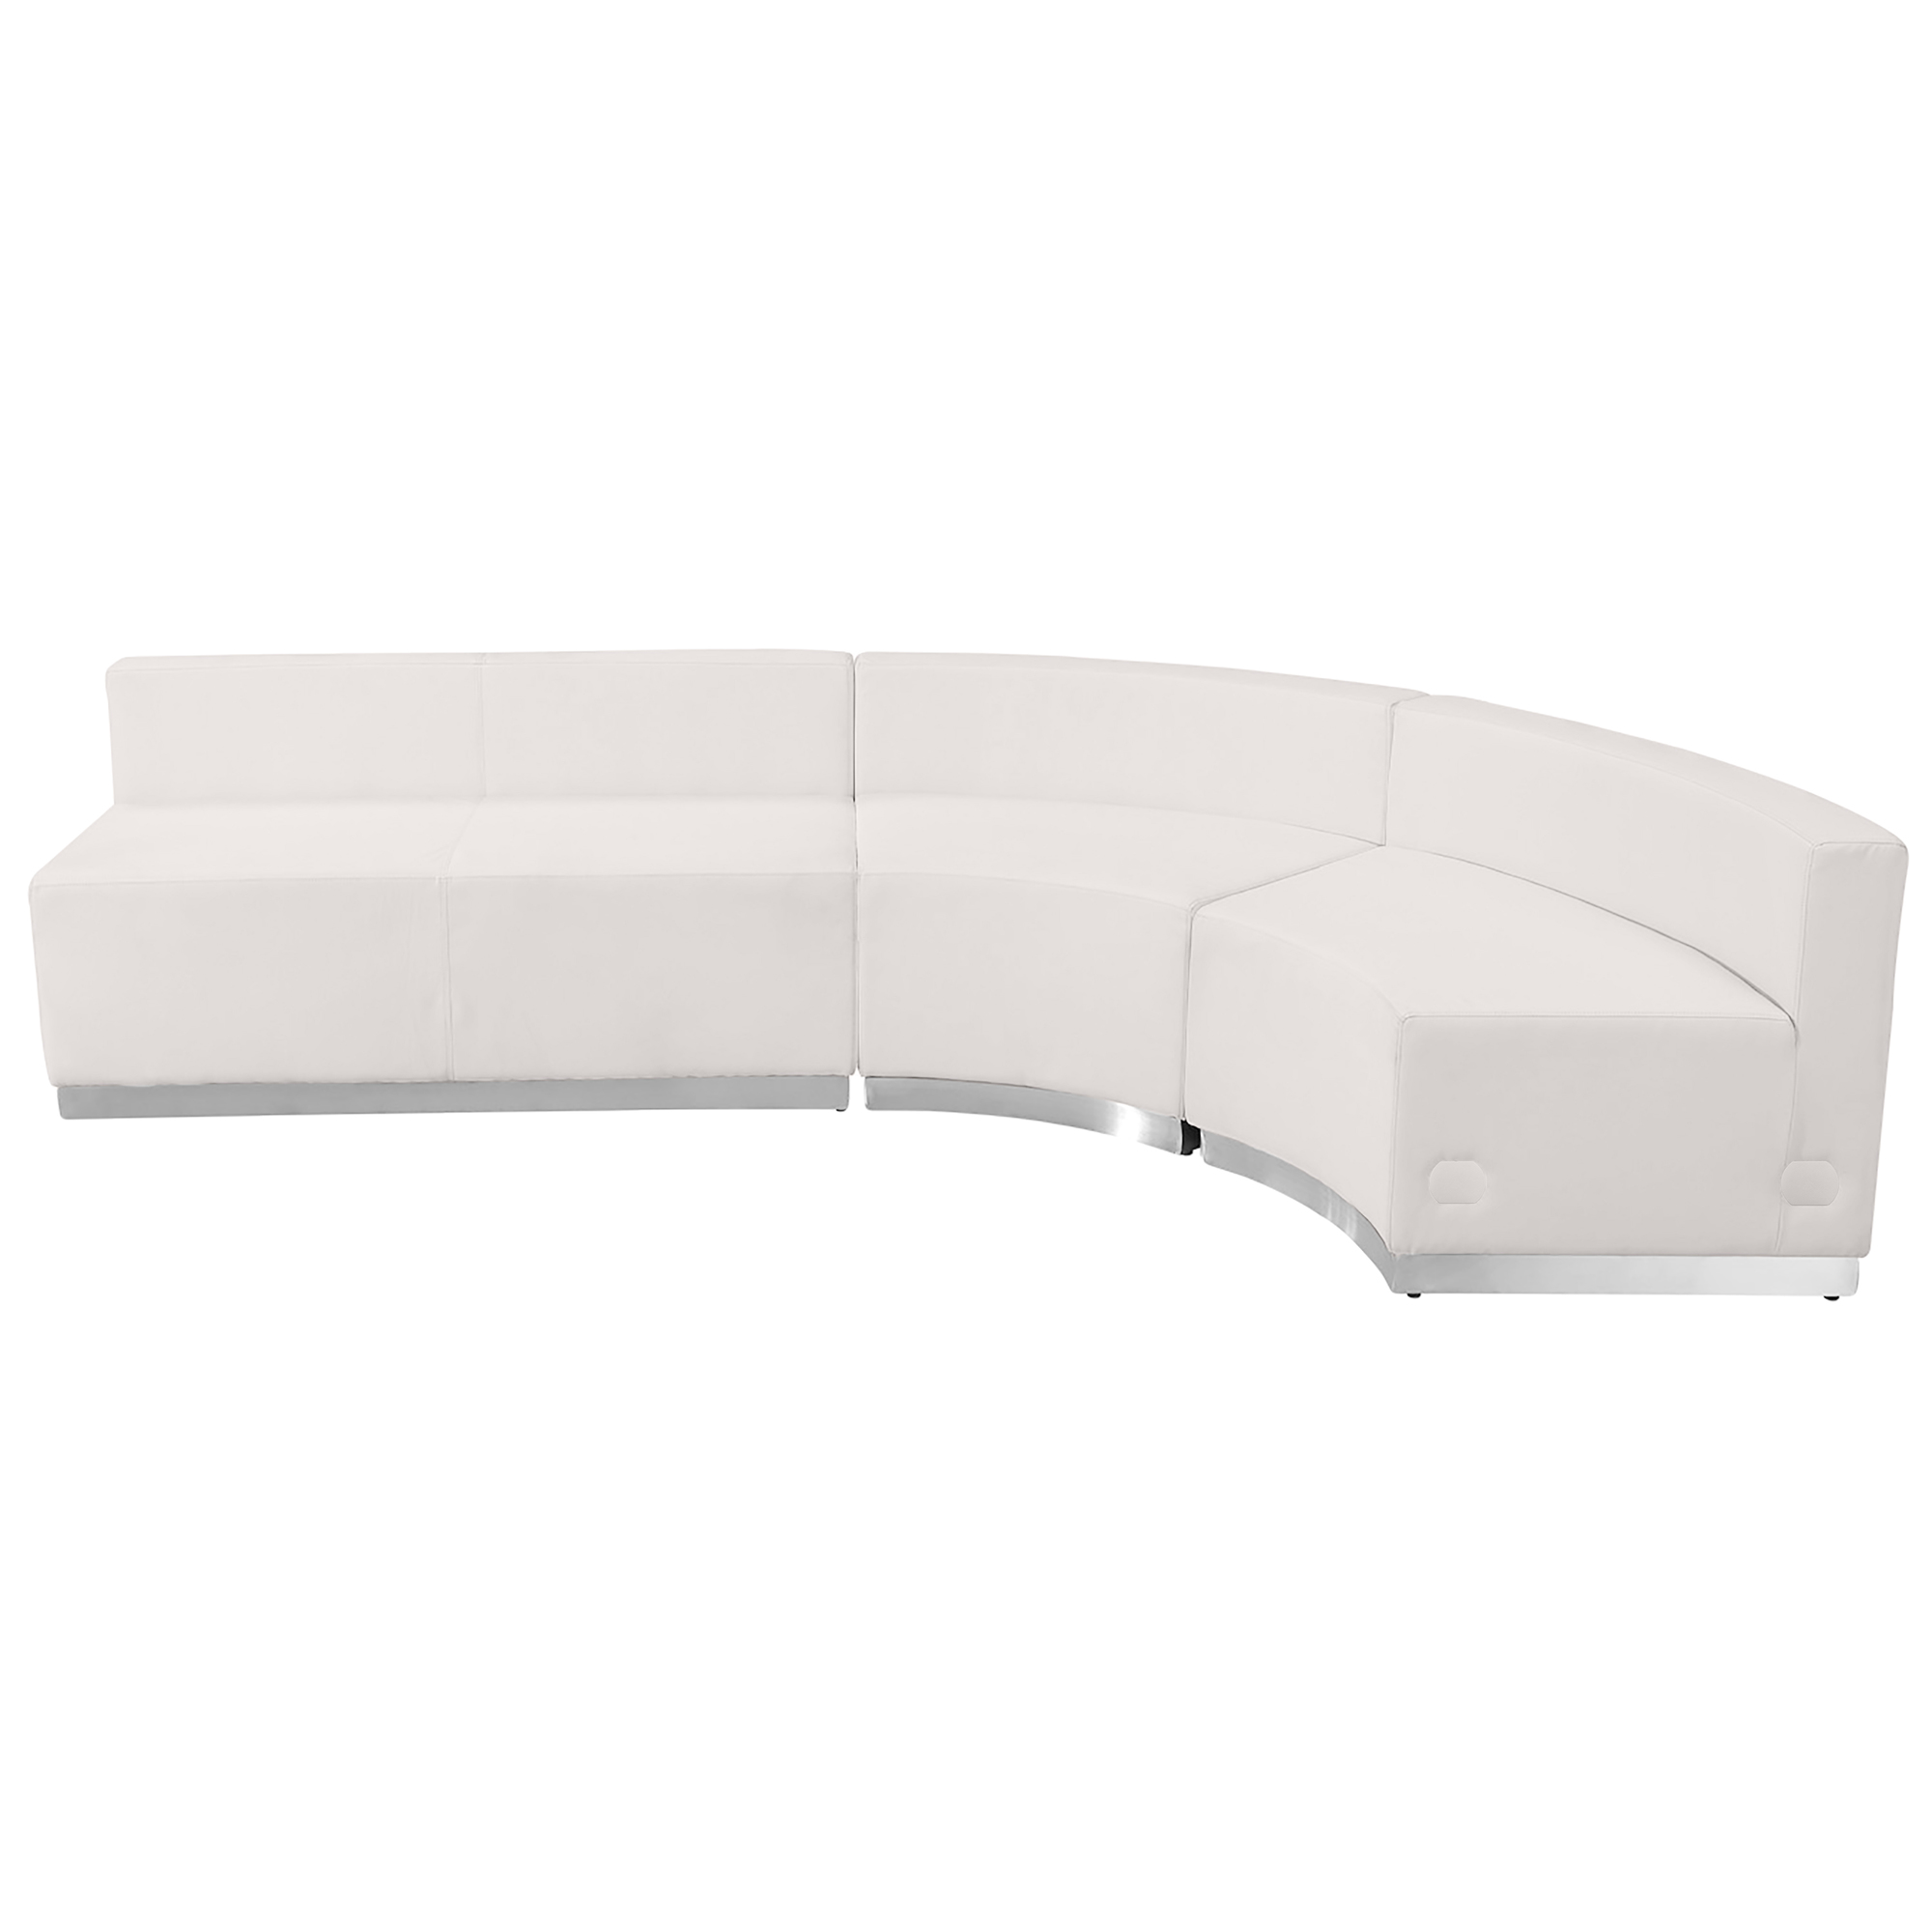 3 PC White LeatherSoft Reception Configuration, Primary Color White, Included (qty.) 3, Model - Flash Furniture ZB803750SWH